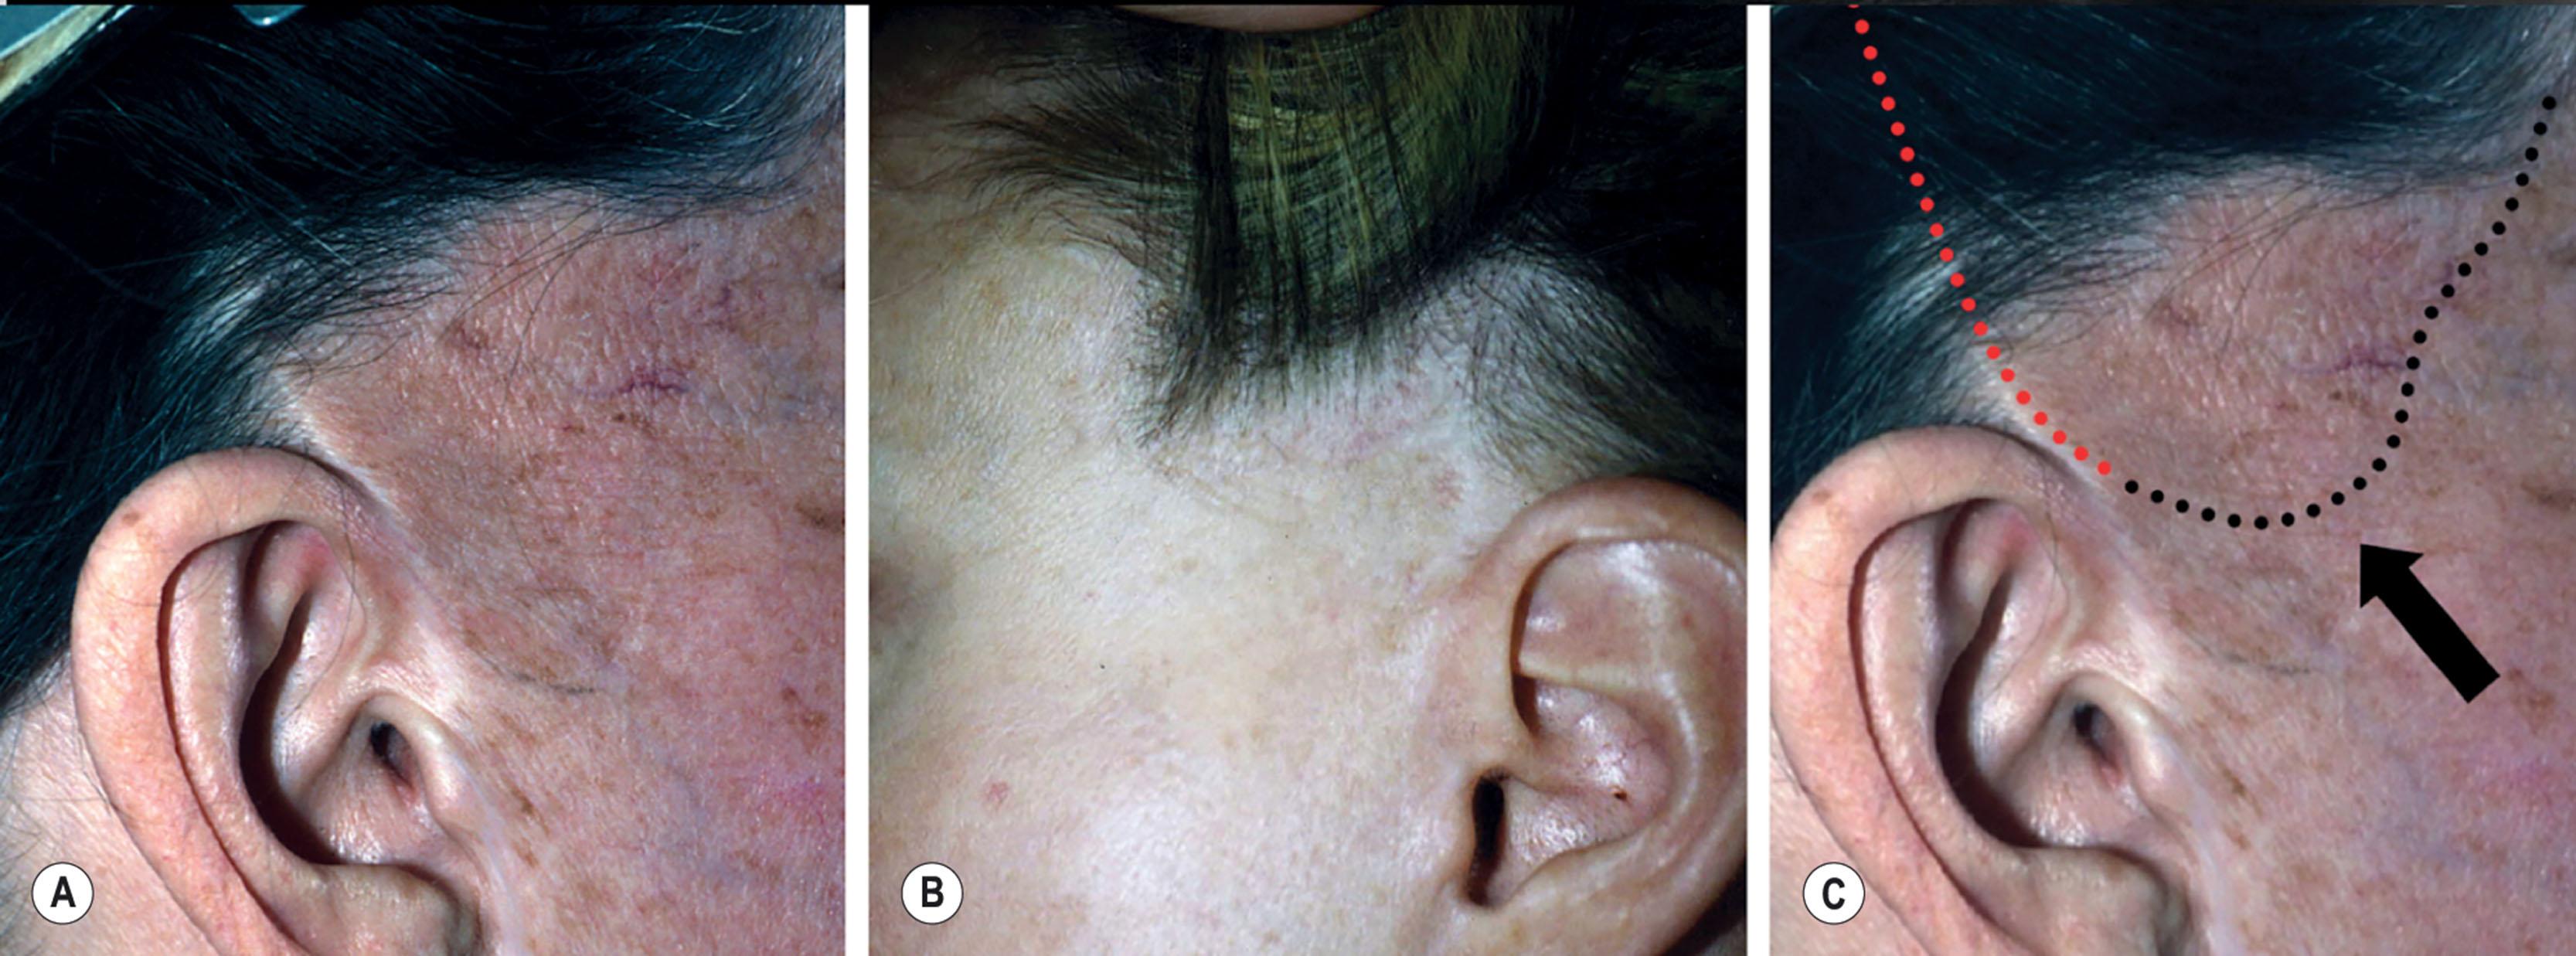 Figure 9.8.6, Displacement of the sideburn and temple hair due to poor incision planning. (A,B) The temporal portion of the facelift incision was made in the temporal scalp (red dotted line in C) in a well-intended but conceptually flawed effort to hide the resulting scar. Because cheek flap redundancy was large and skin elasticity poor, advancement of the cheek skin flap has resulted in objectionable and tell-tale hairline displacement. An incision along the hairline would have prevented this occurrence (black dotted line in C). (Procedures performed by unknown surgeons.) (C) Deconstruction of cause of temporal hairline displacement seen in A and B. The operating surgeon made an error in planning. He or she made a well-intended effort to hide the temporal portion of the facelift incision in the temporal scalp (red dotted line), but underestimated or did not appreciate the amount of skin redundancy over the upper lateral cheek. When the facelift skin flap was advanced (black arrow) skin was moved into an area were scalp and hair should be present. The black dotted line shows the incision plan that would have prevented this occurrence. (Procedure performed by an unknown surgeon.)